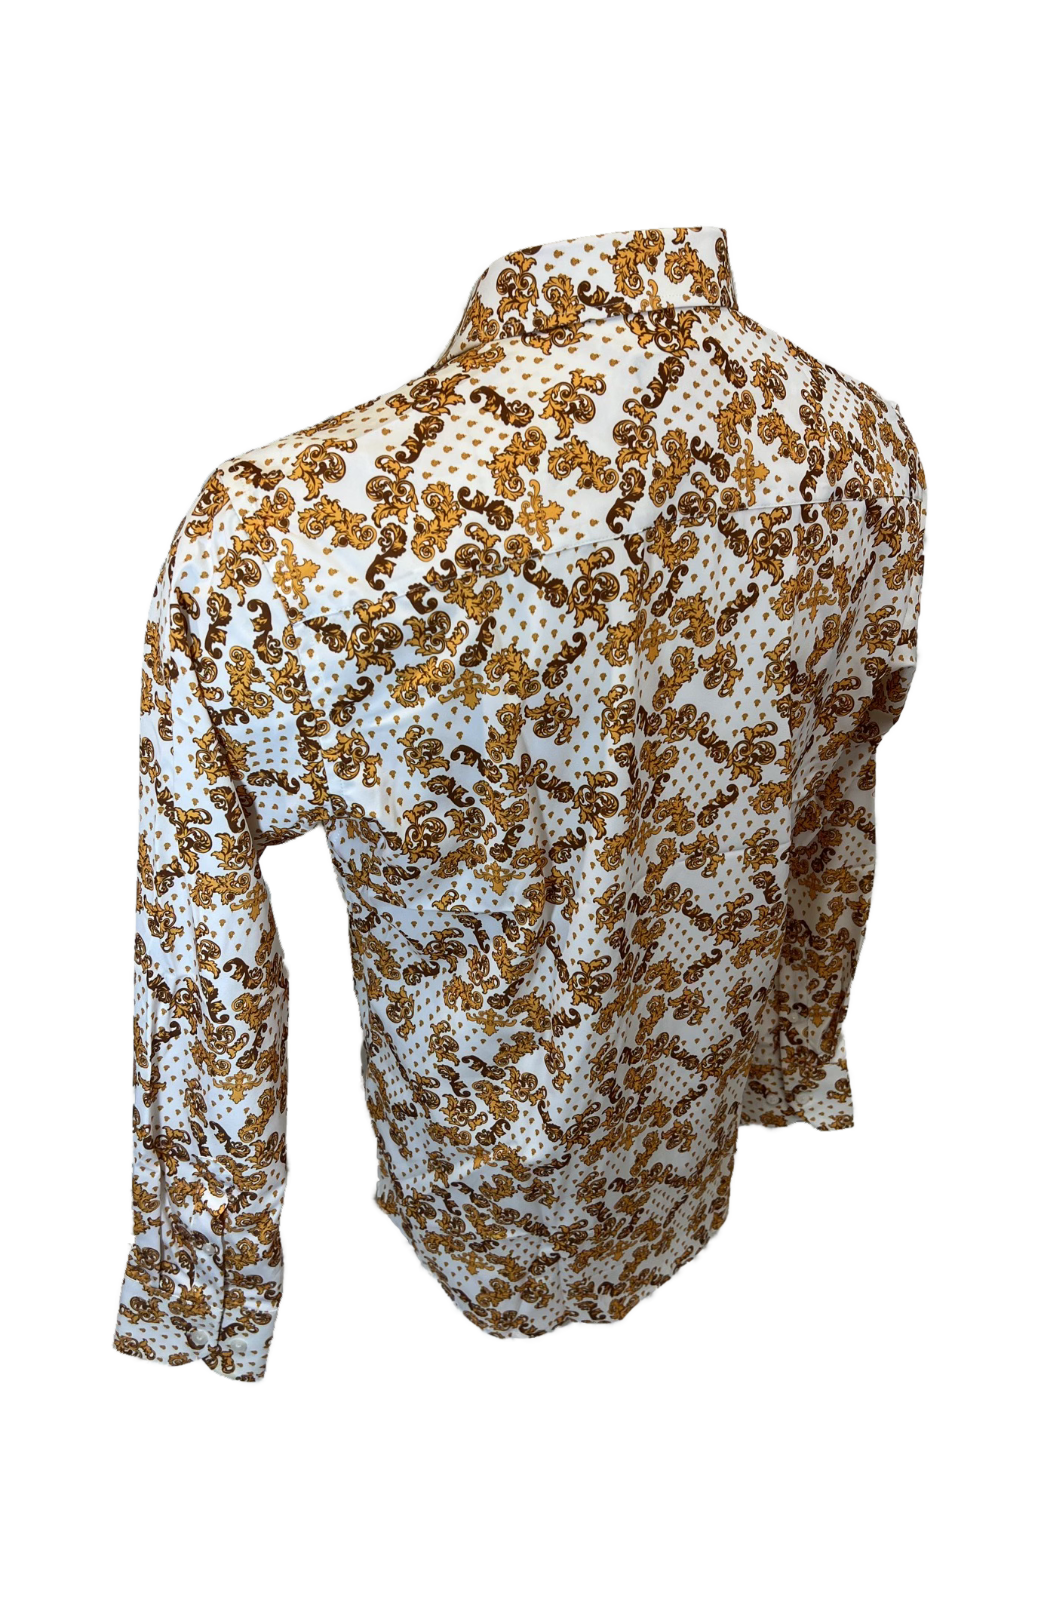 Men's Long Sleeve Button Down Dress Shirt White Yellow Brown All Over Floral Design